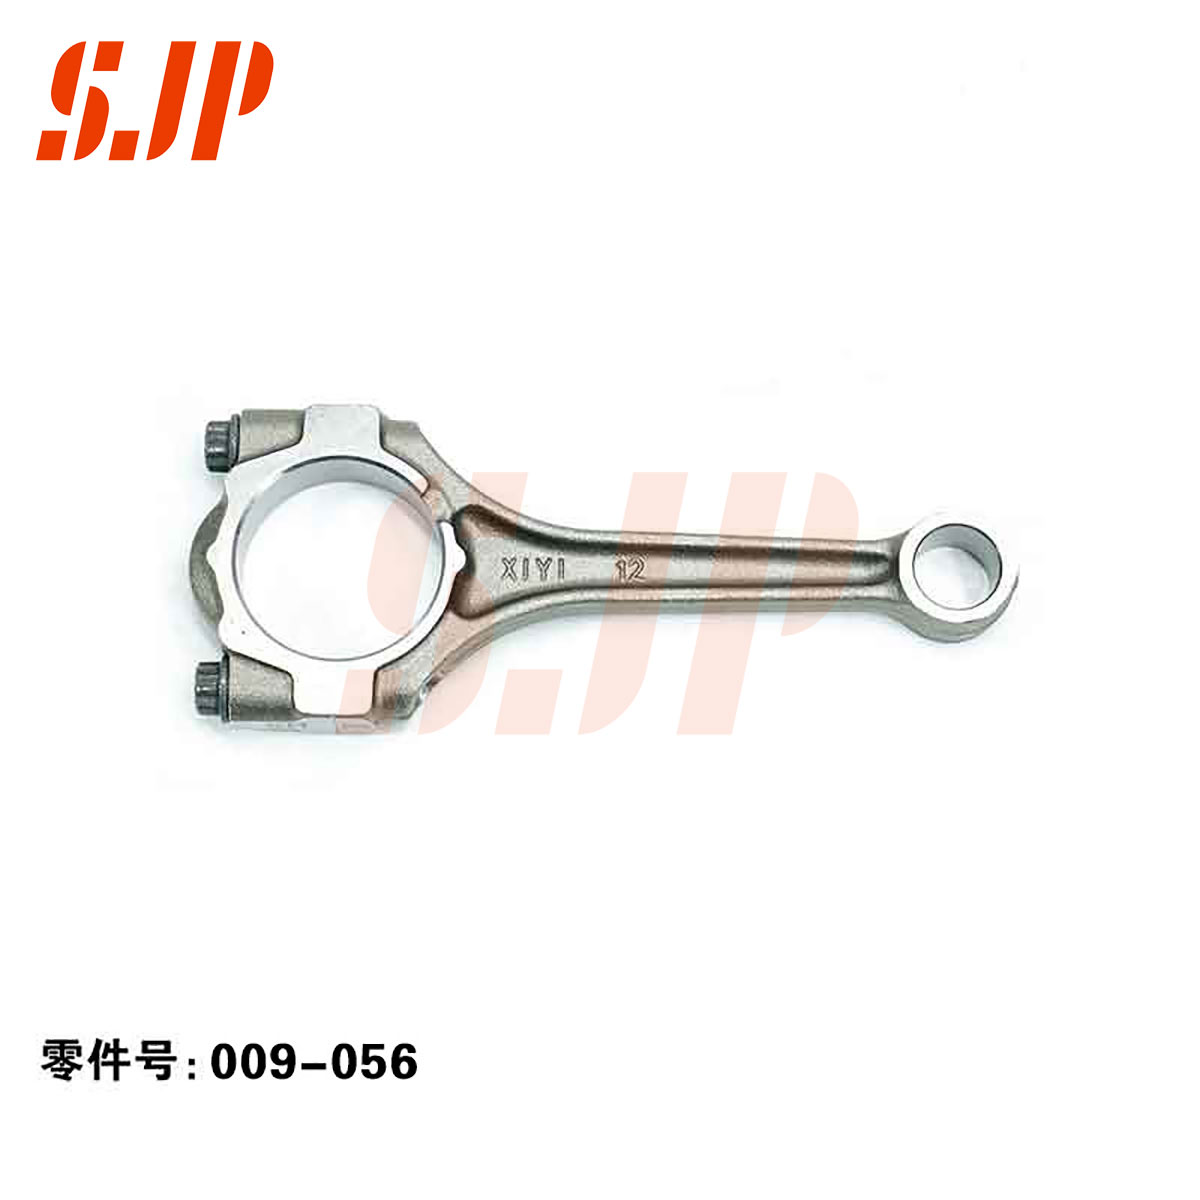 SJ-009-056 Connecting Rod For 4A13